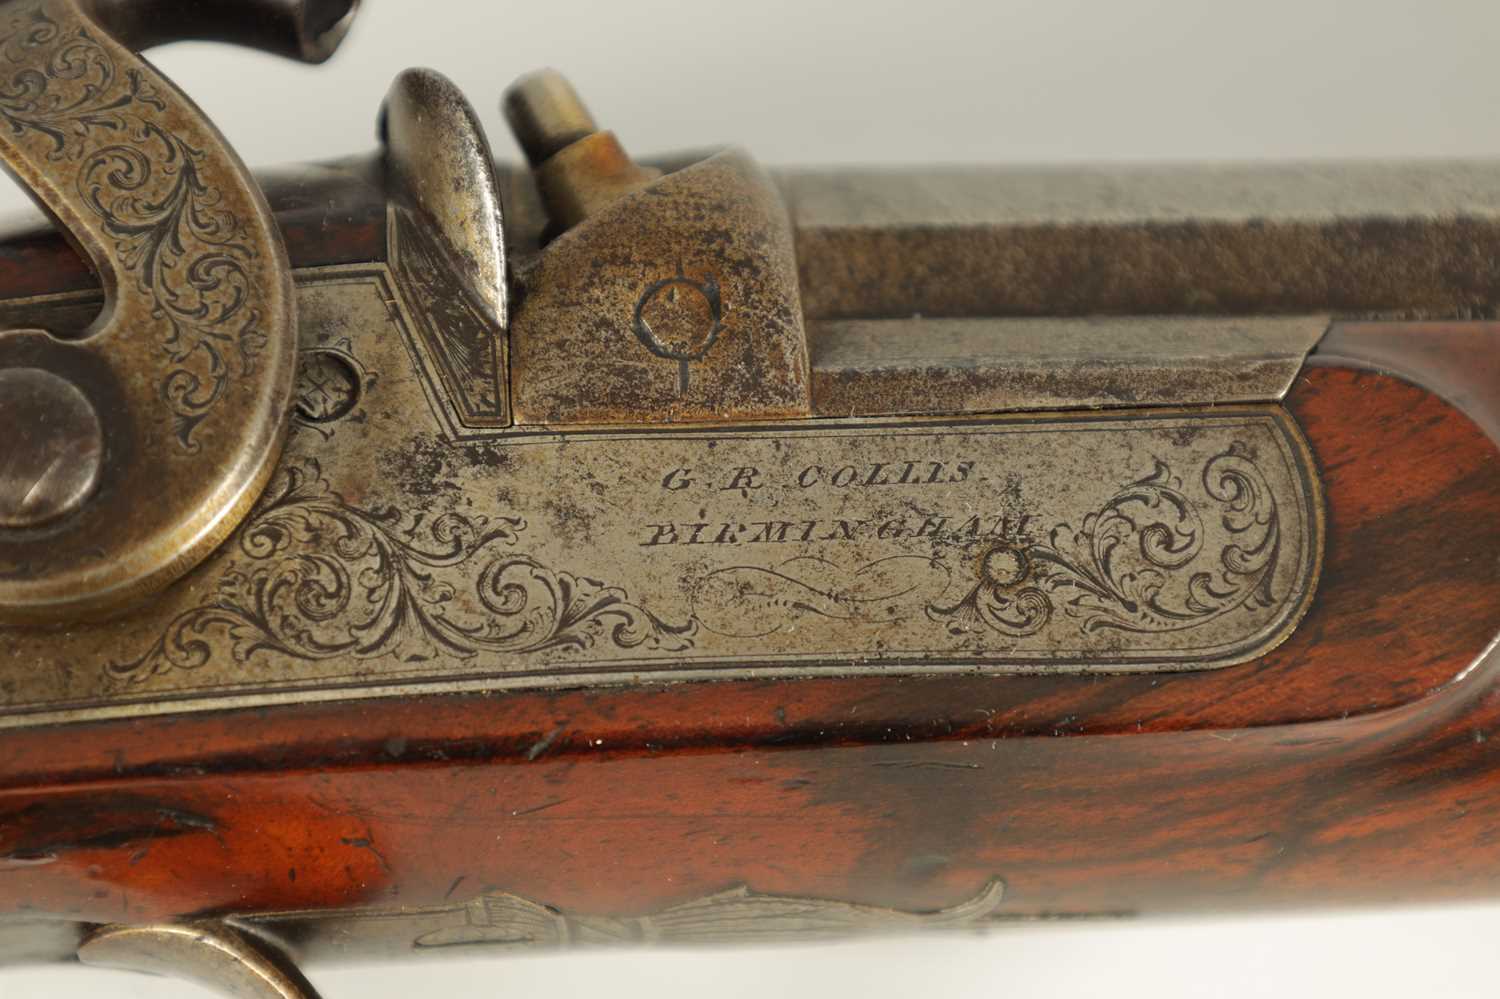 G R COLLIS, BIRMINGHAM. AN EARLY 19TH CENTURY WALNUT PERCUSSION HOLSTER PISTOL - Image 3 of 10